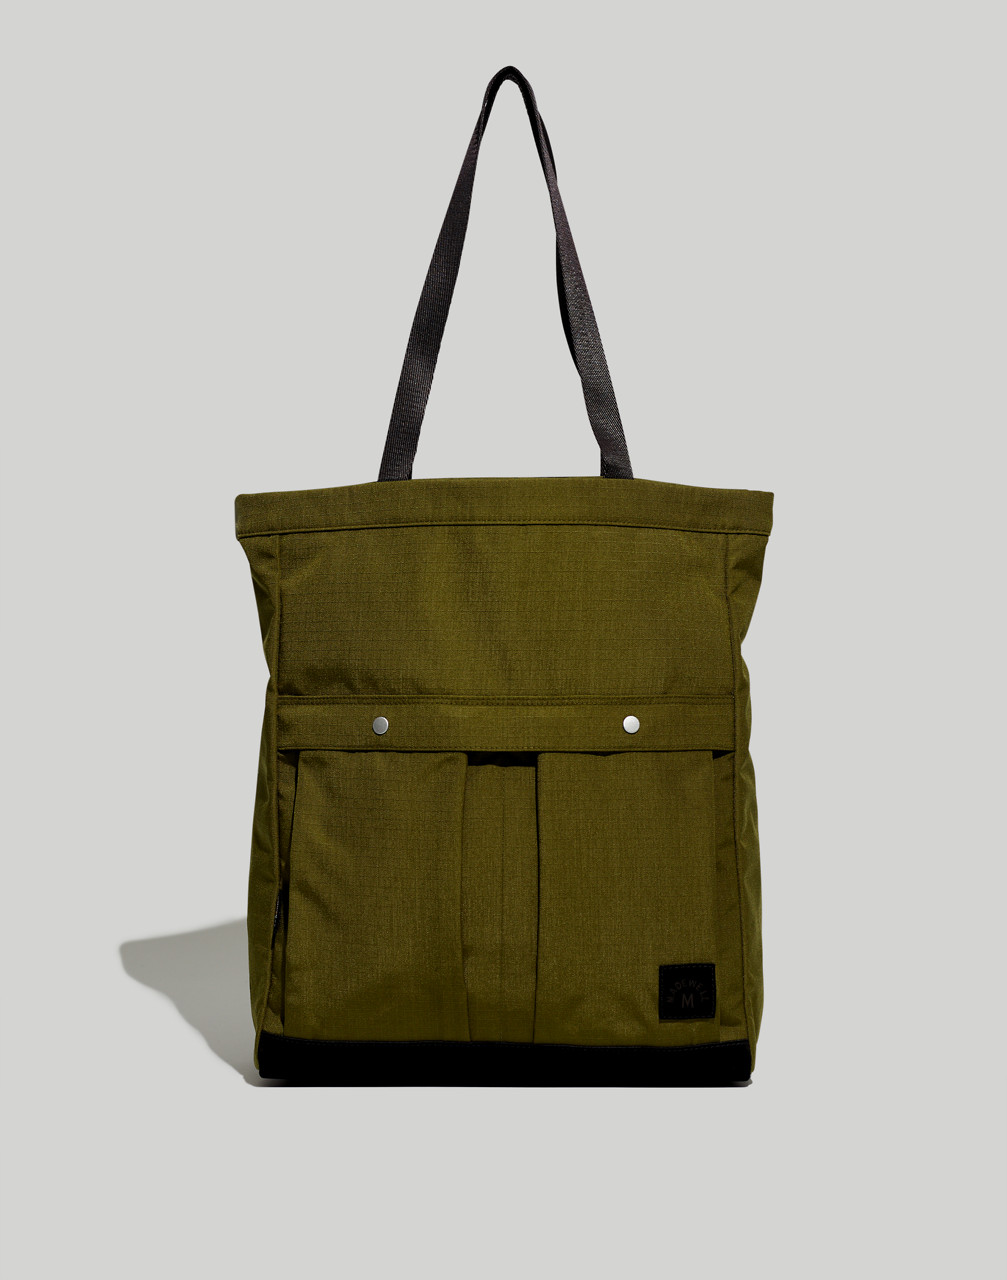 Mw The Rush Hour Tote In Loden